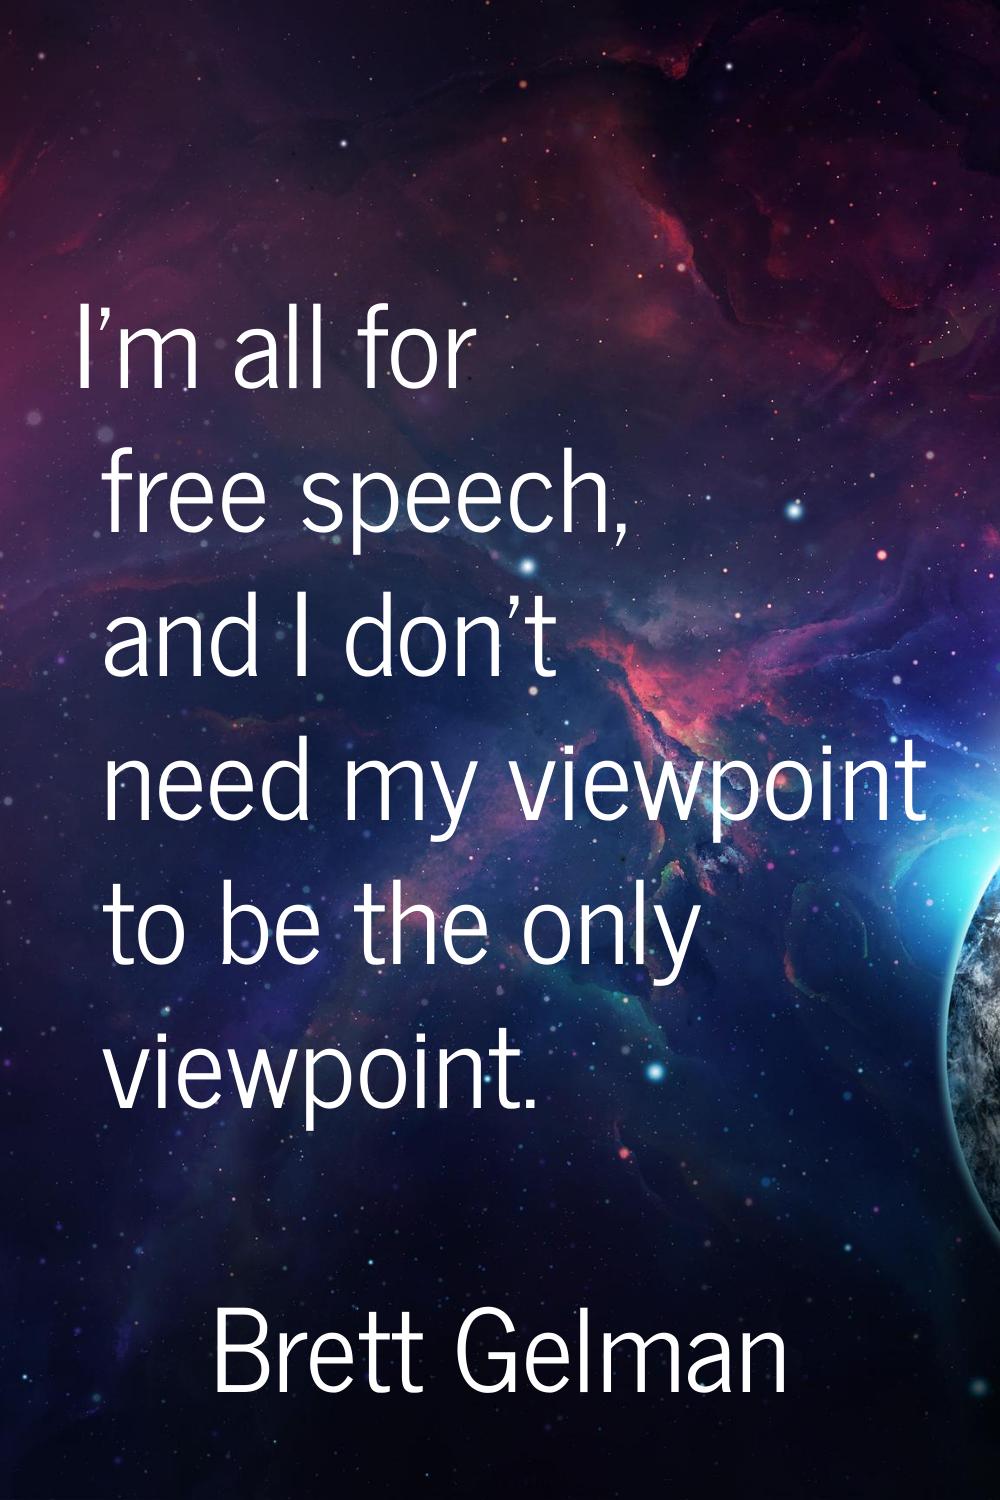 I'm all for free speech, and I don't need my viewpoint to be the only viewpoint.